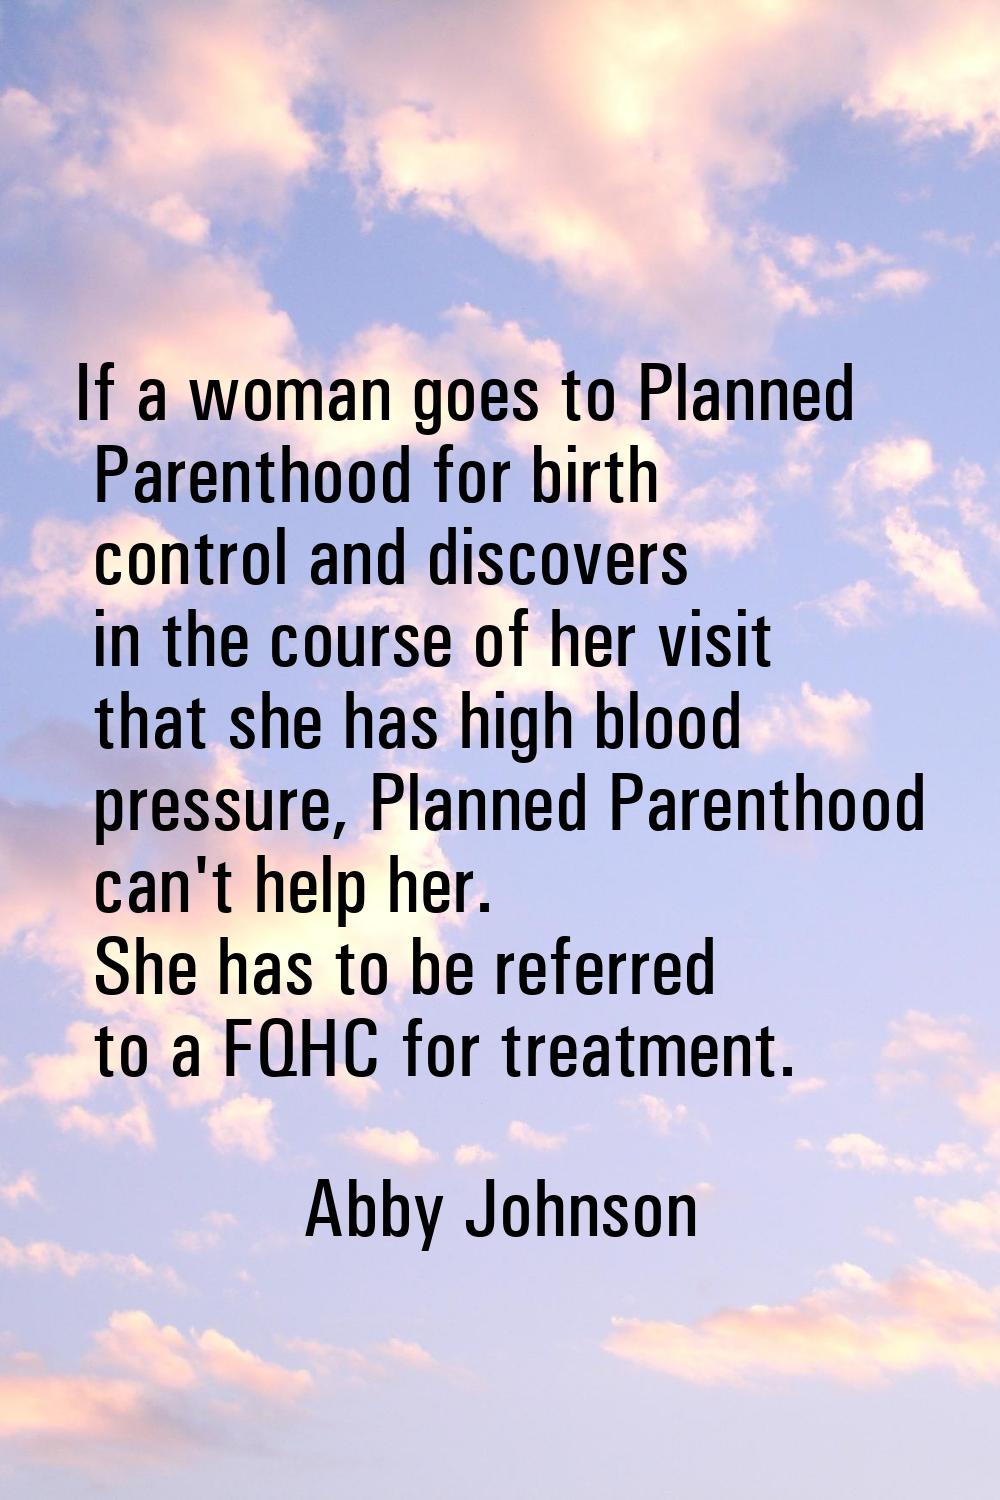 If a woman goes to Planned Parenthood for birth control and discovers in the course of her visit th